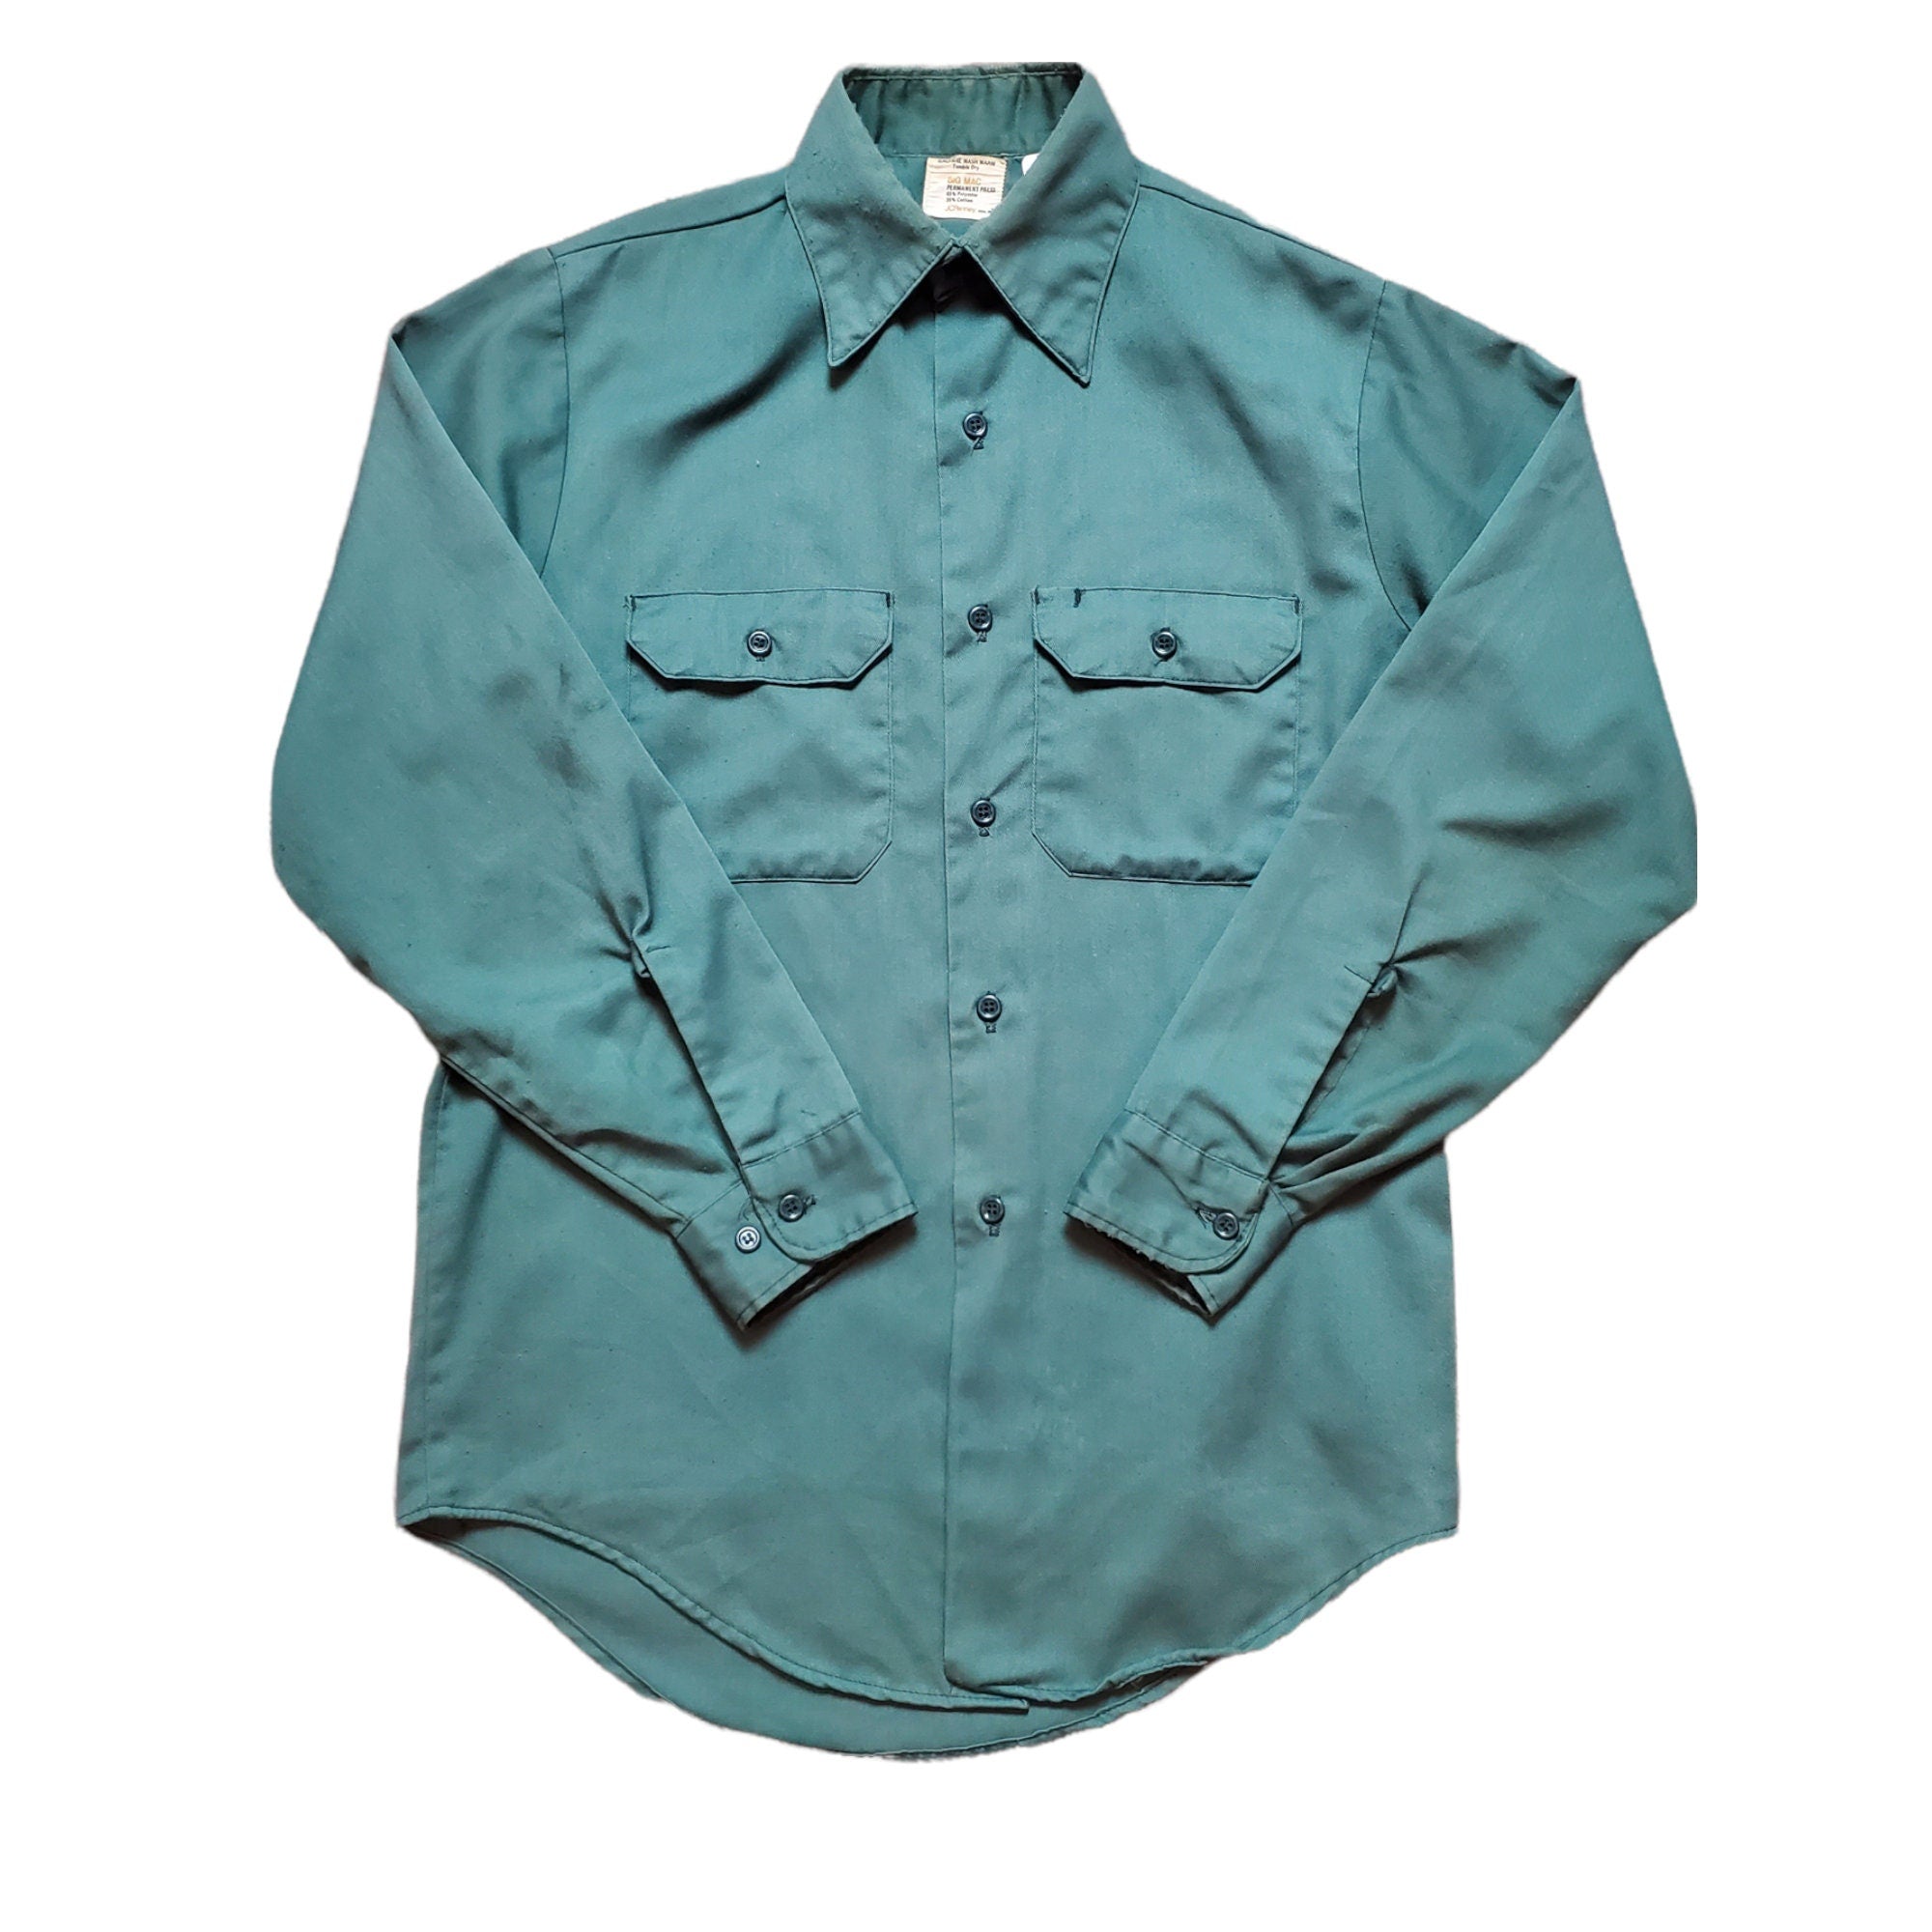 1970s/1980s JCPenney Big Mac Work Shirt Size M/L